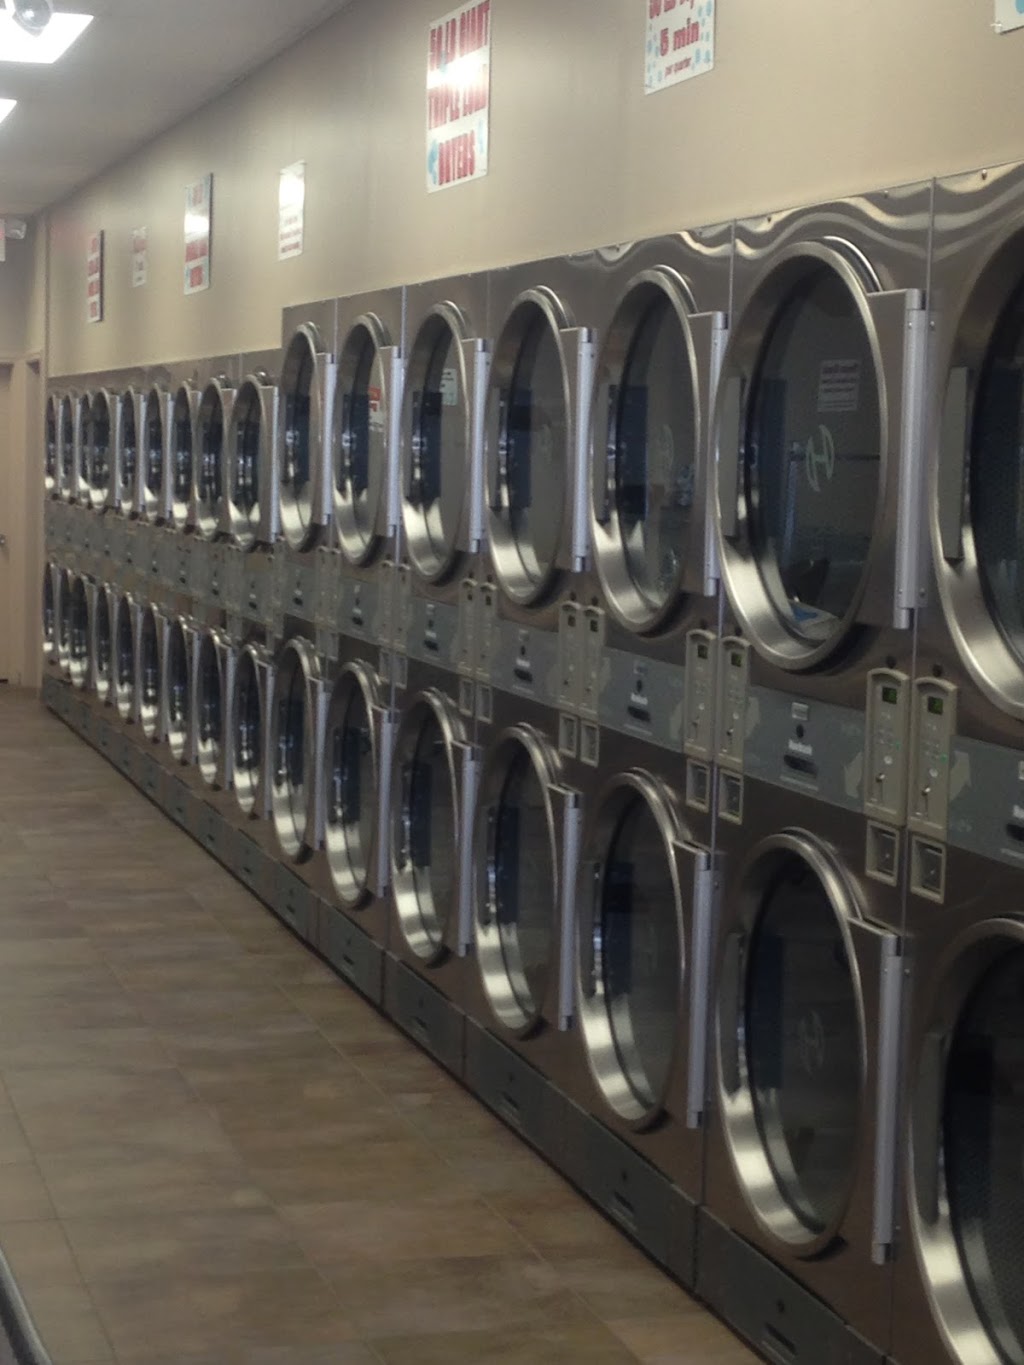 Washing Board Laundromat | 52 N Middletown Rd, Pearl River, NY 10965 | Phone: (845) 735-9246